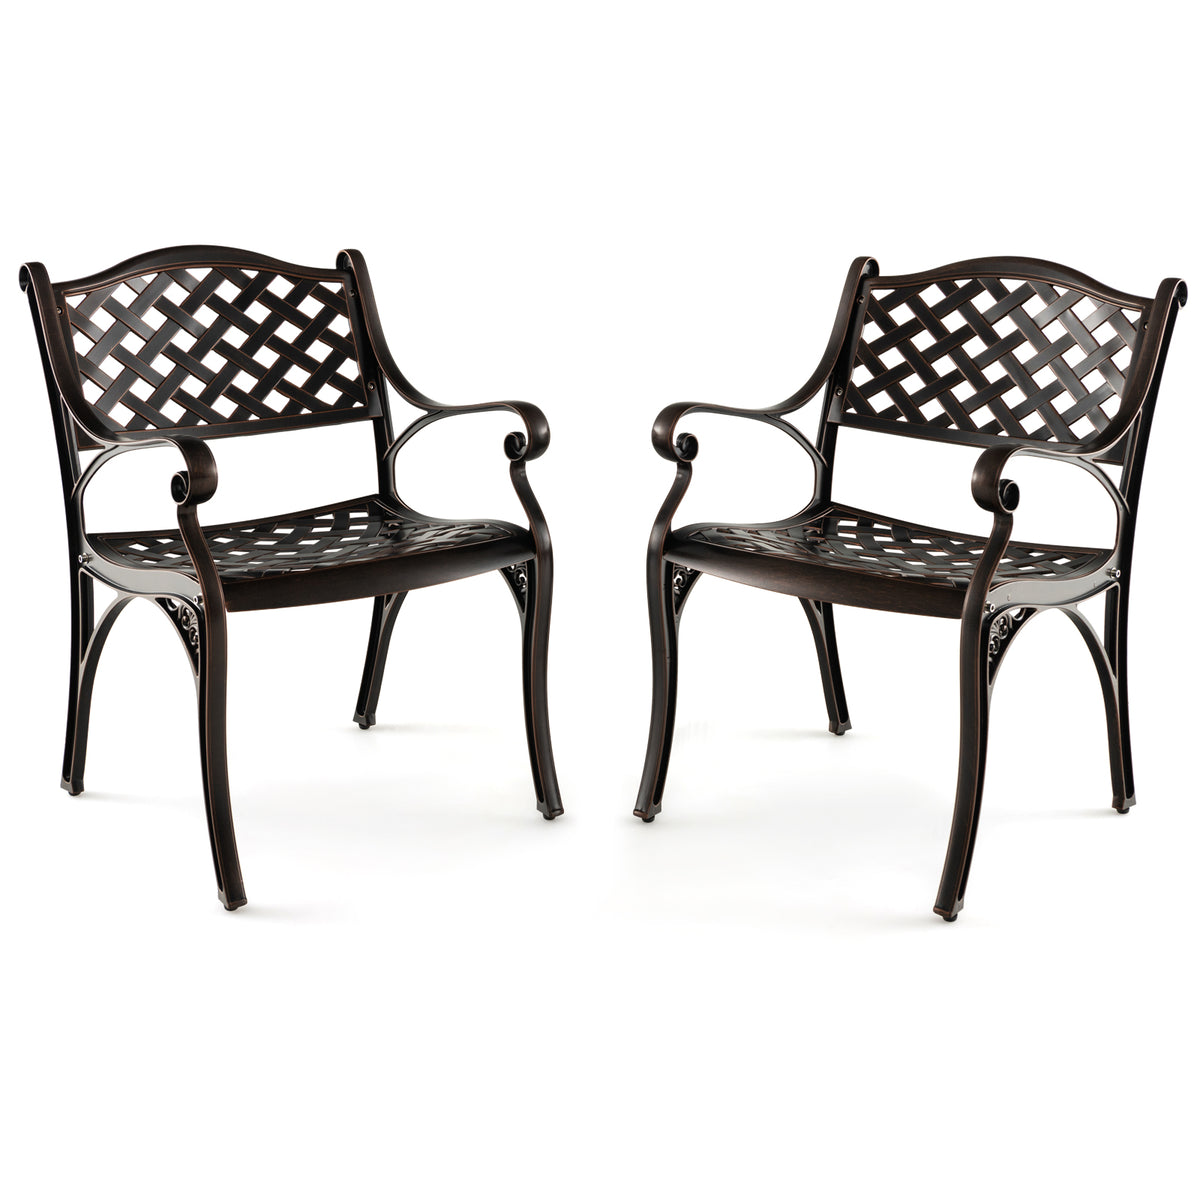 Cast Aluminum  Patio Dining Chairs Set of 2 with Armrests Flower Pattern